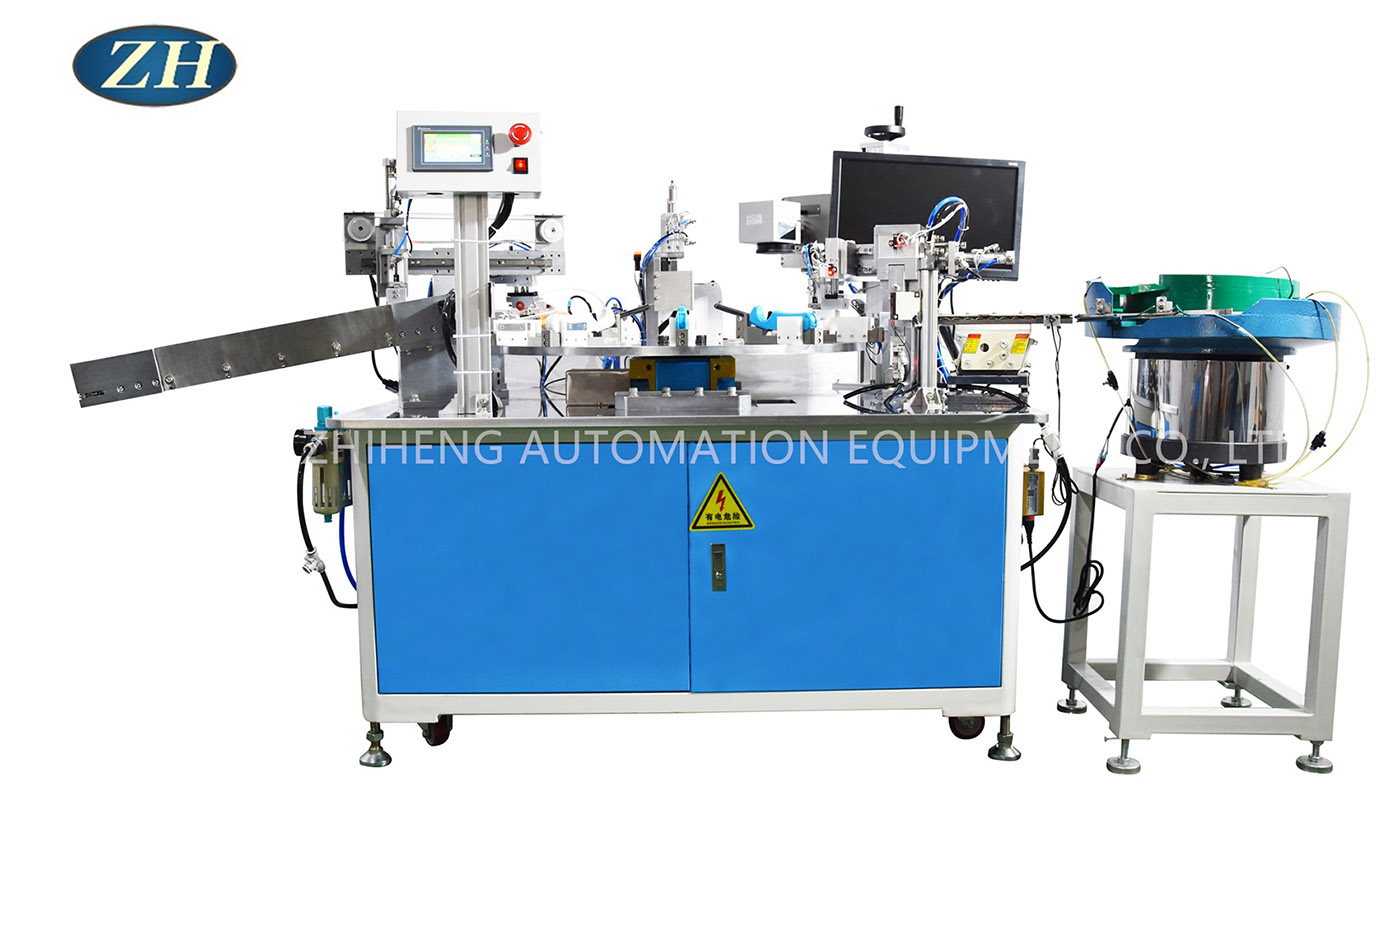 Assembly Automation Systems